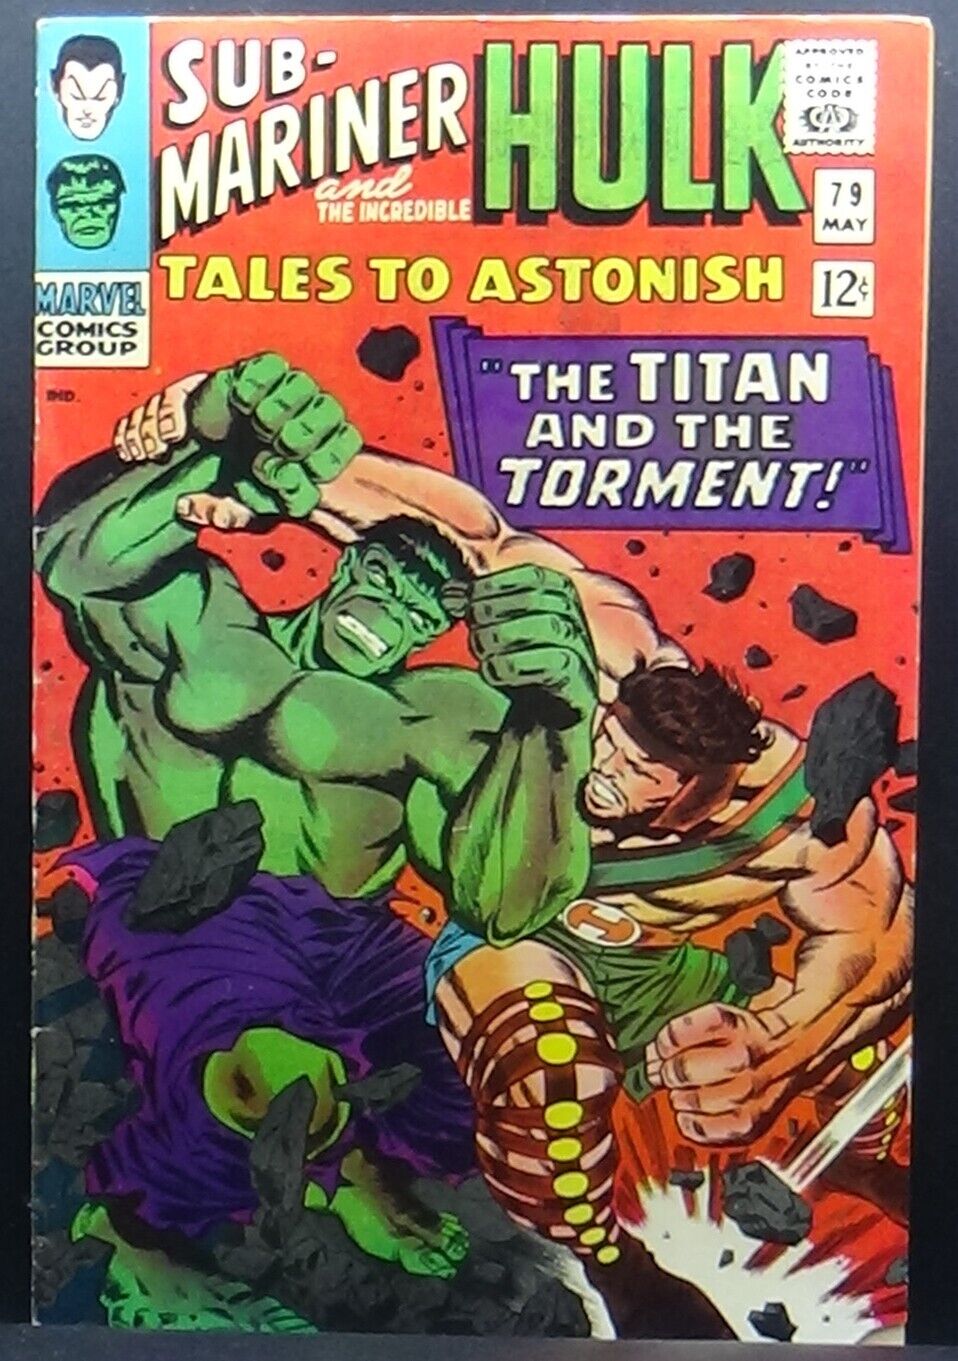 TALES TO ASTONISH #79 VF 7.5-8.0 FIRST HERCULES VS HULK (COVER) CLASSIC ISSUE